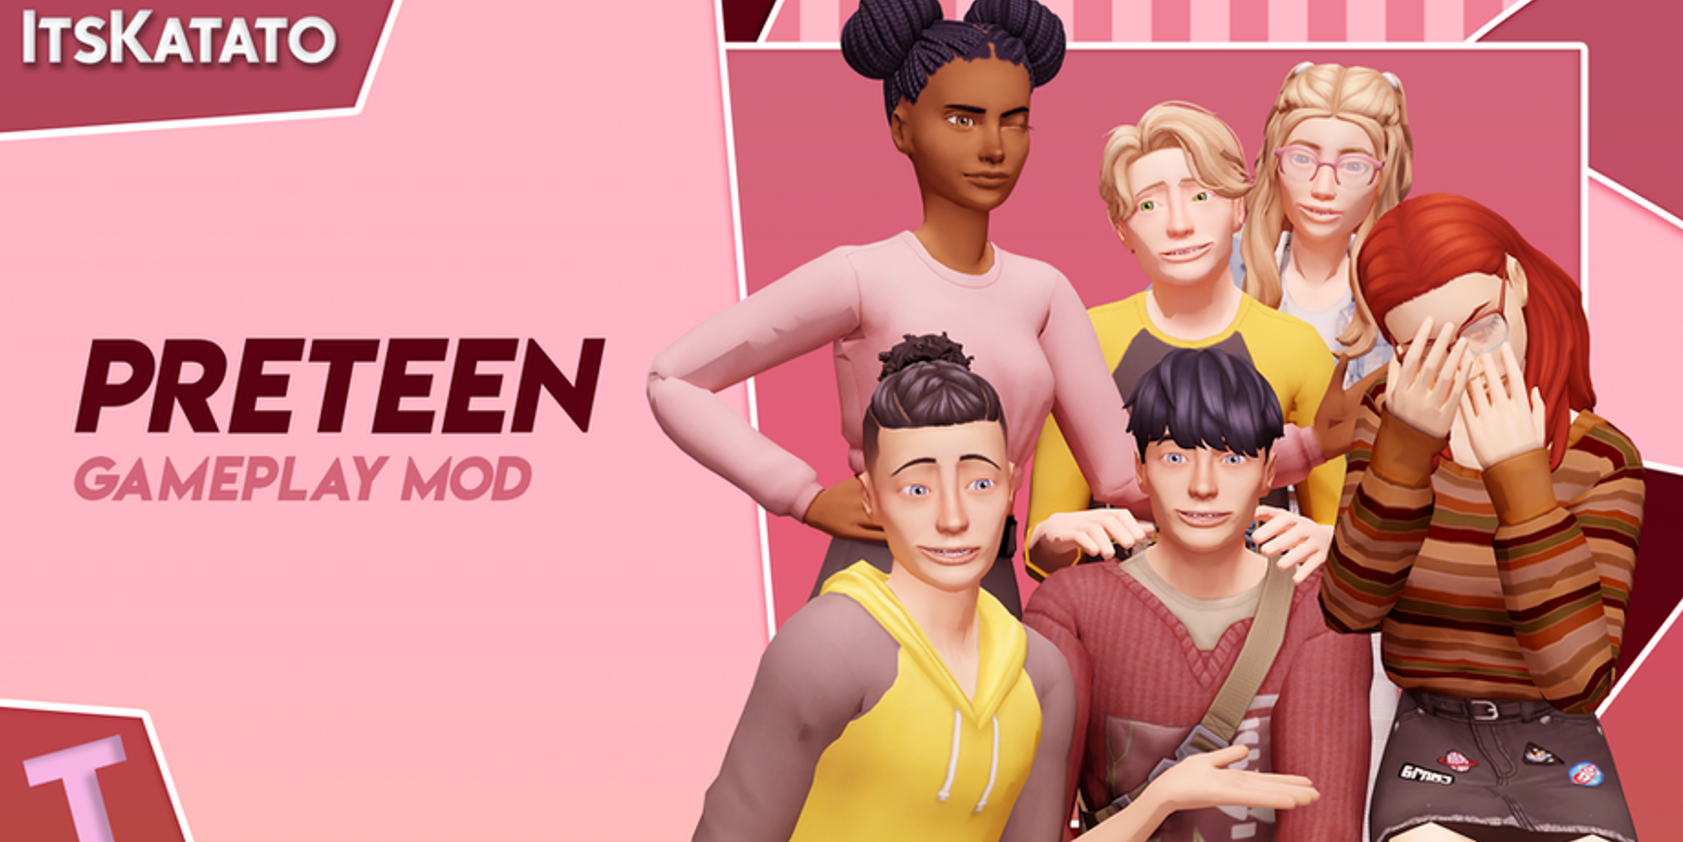 The Sims 4 Everything You Need To Know About ItsKatato's PreTeen Mod